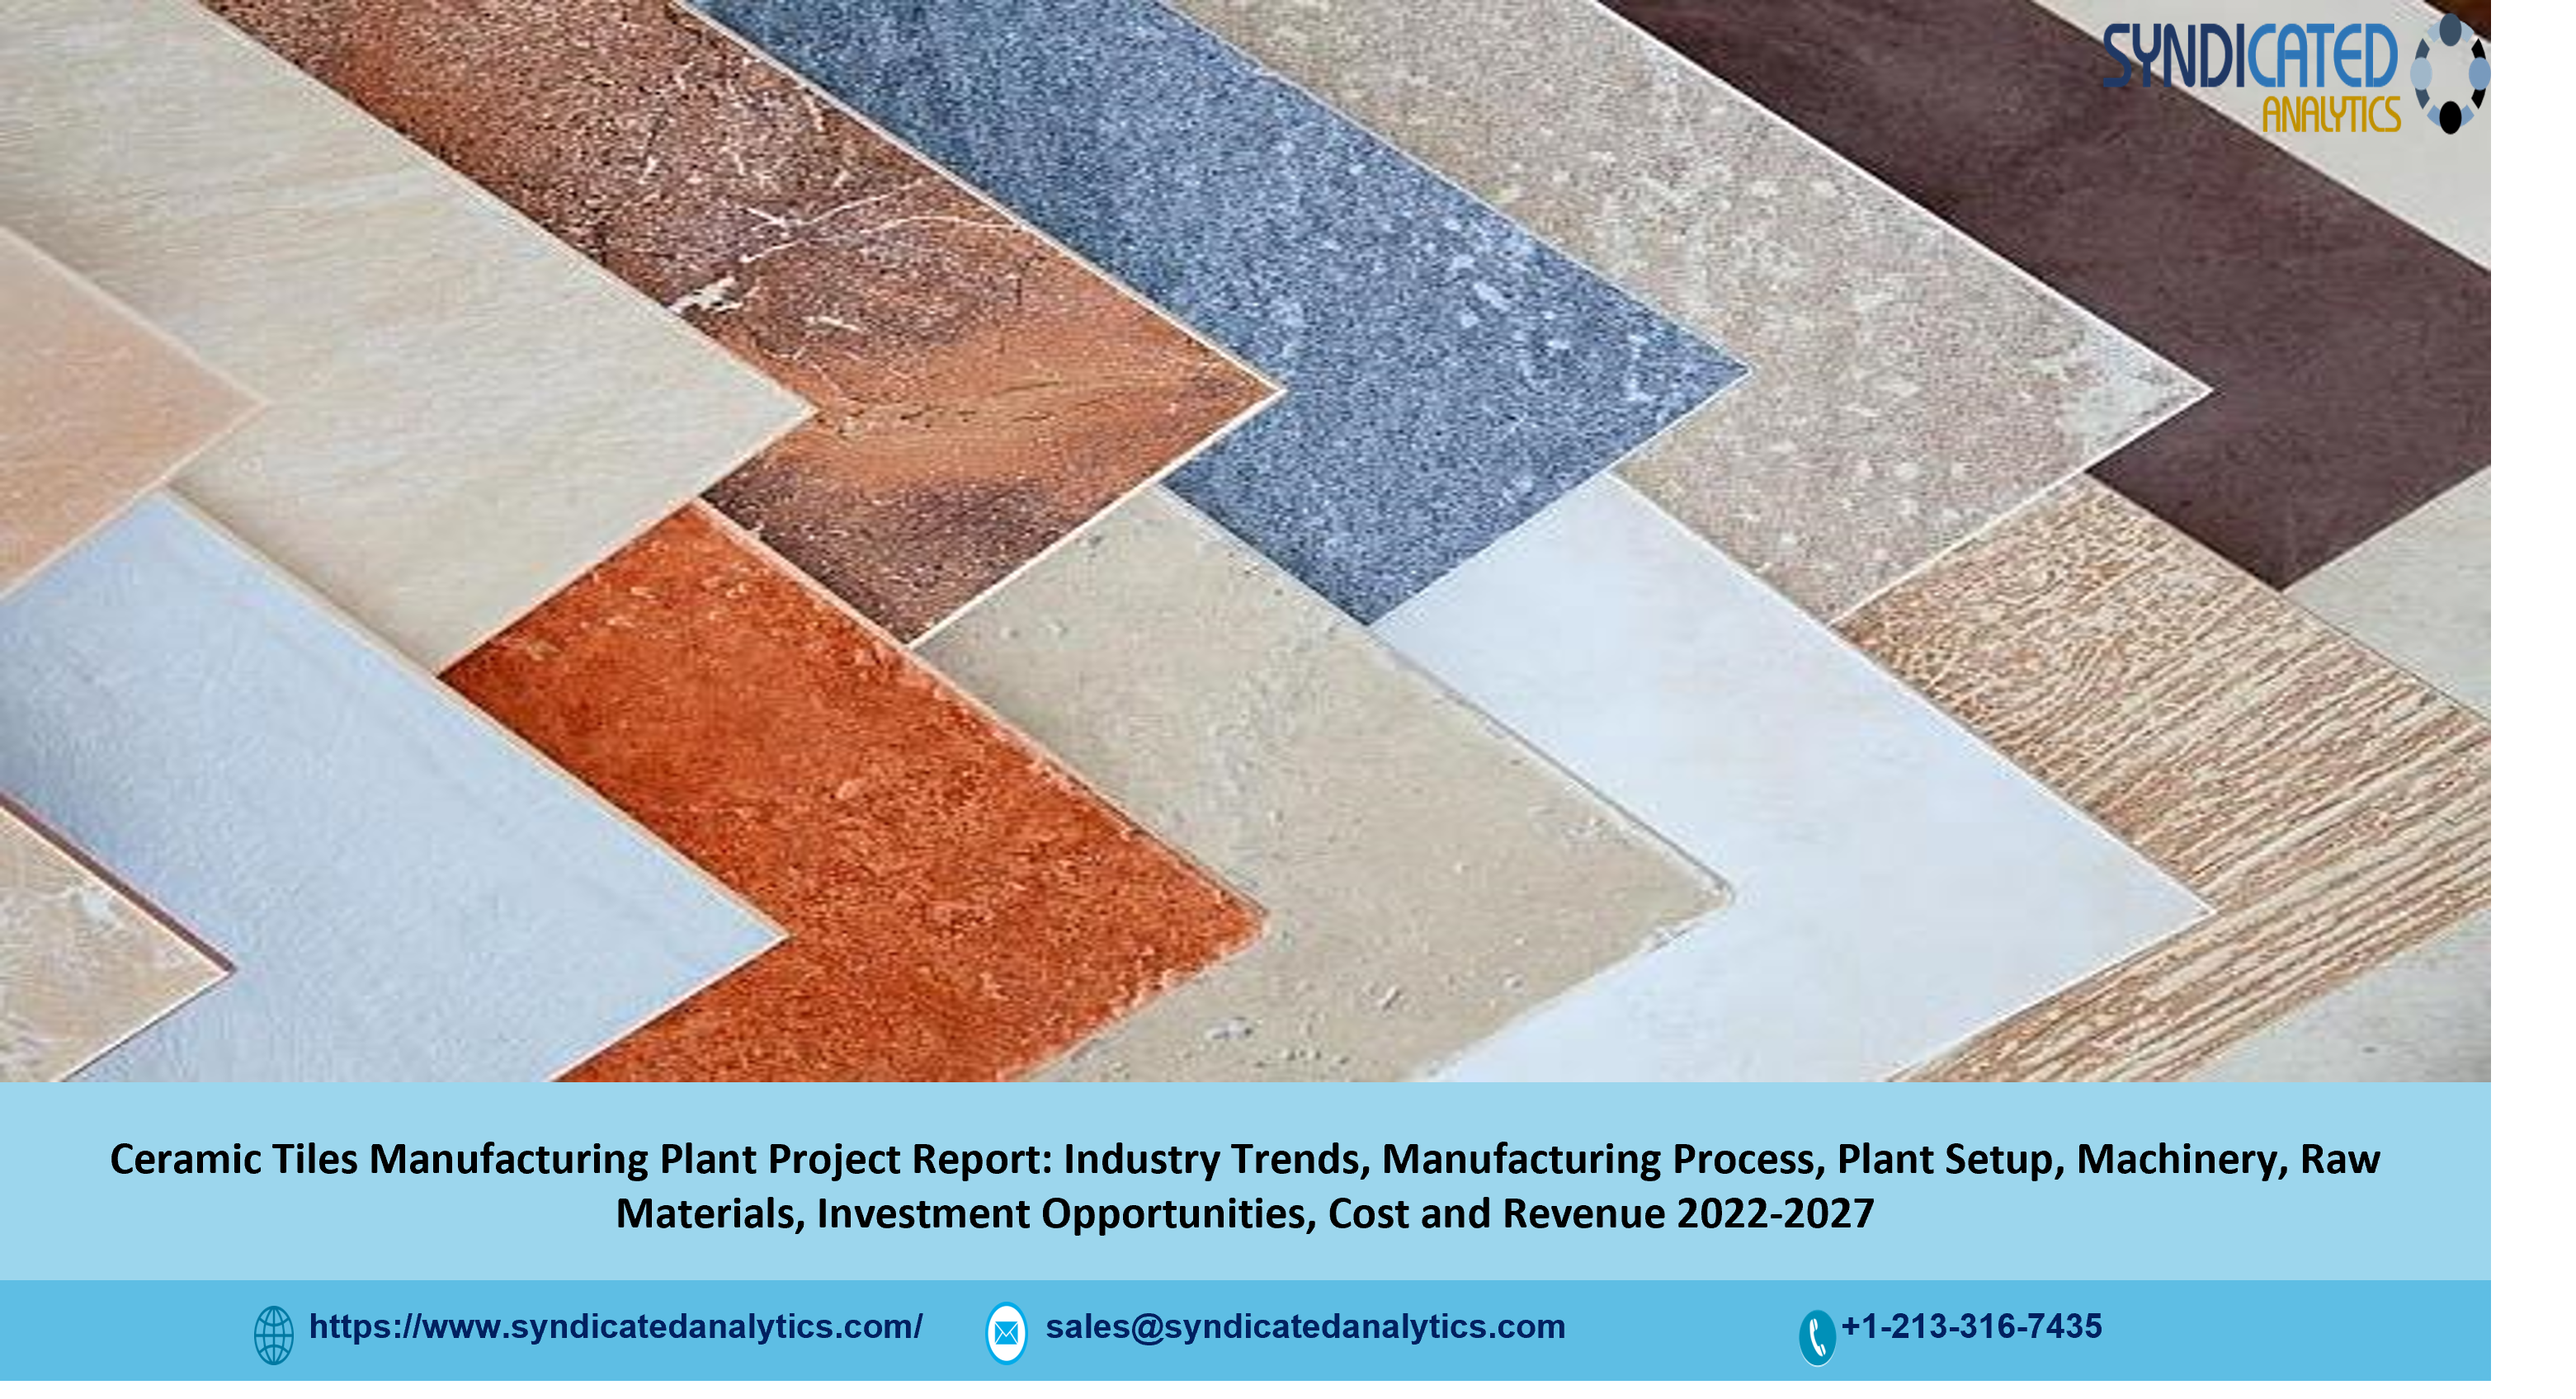 Ceramic Tile Manufacturing Plant Cost and Project Report 2022-2027: Plant Setup, Business Plan, Plant Cost, Industry Trends, Raw Materials, Cost and Revenue, Machinery Requirements - Syndicated Analytics